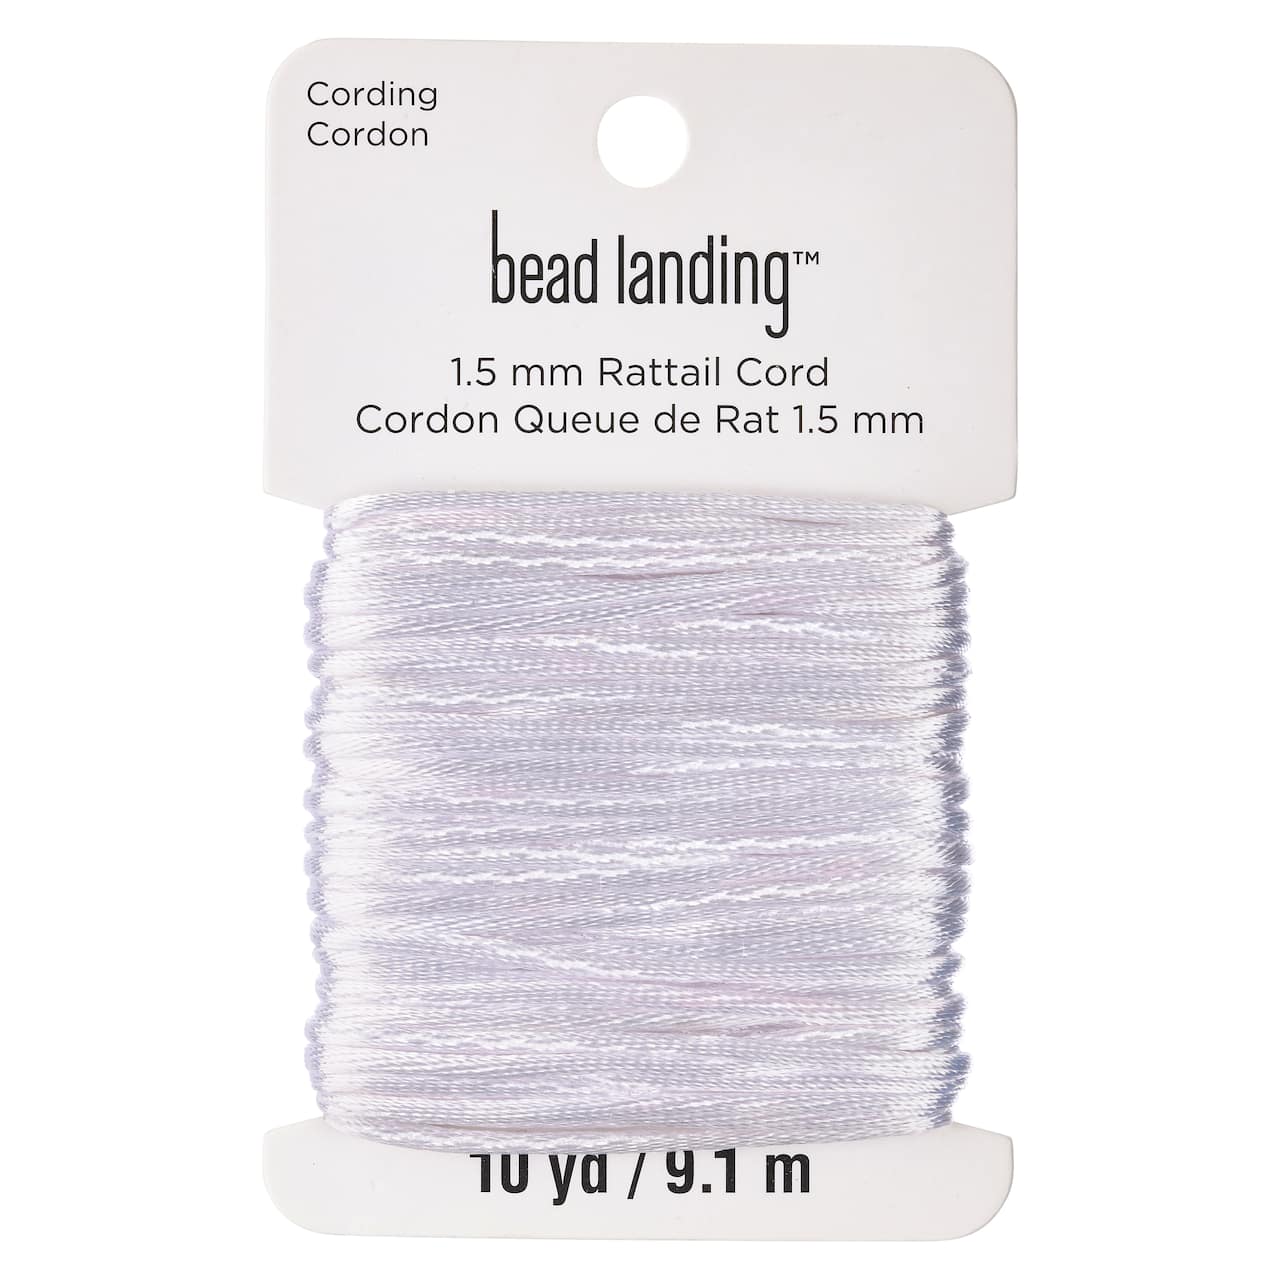 1.5mm Rattail Cord by Bead Landing in White | Michaels